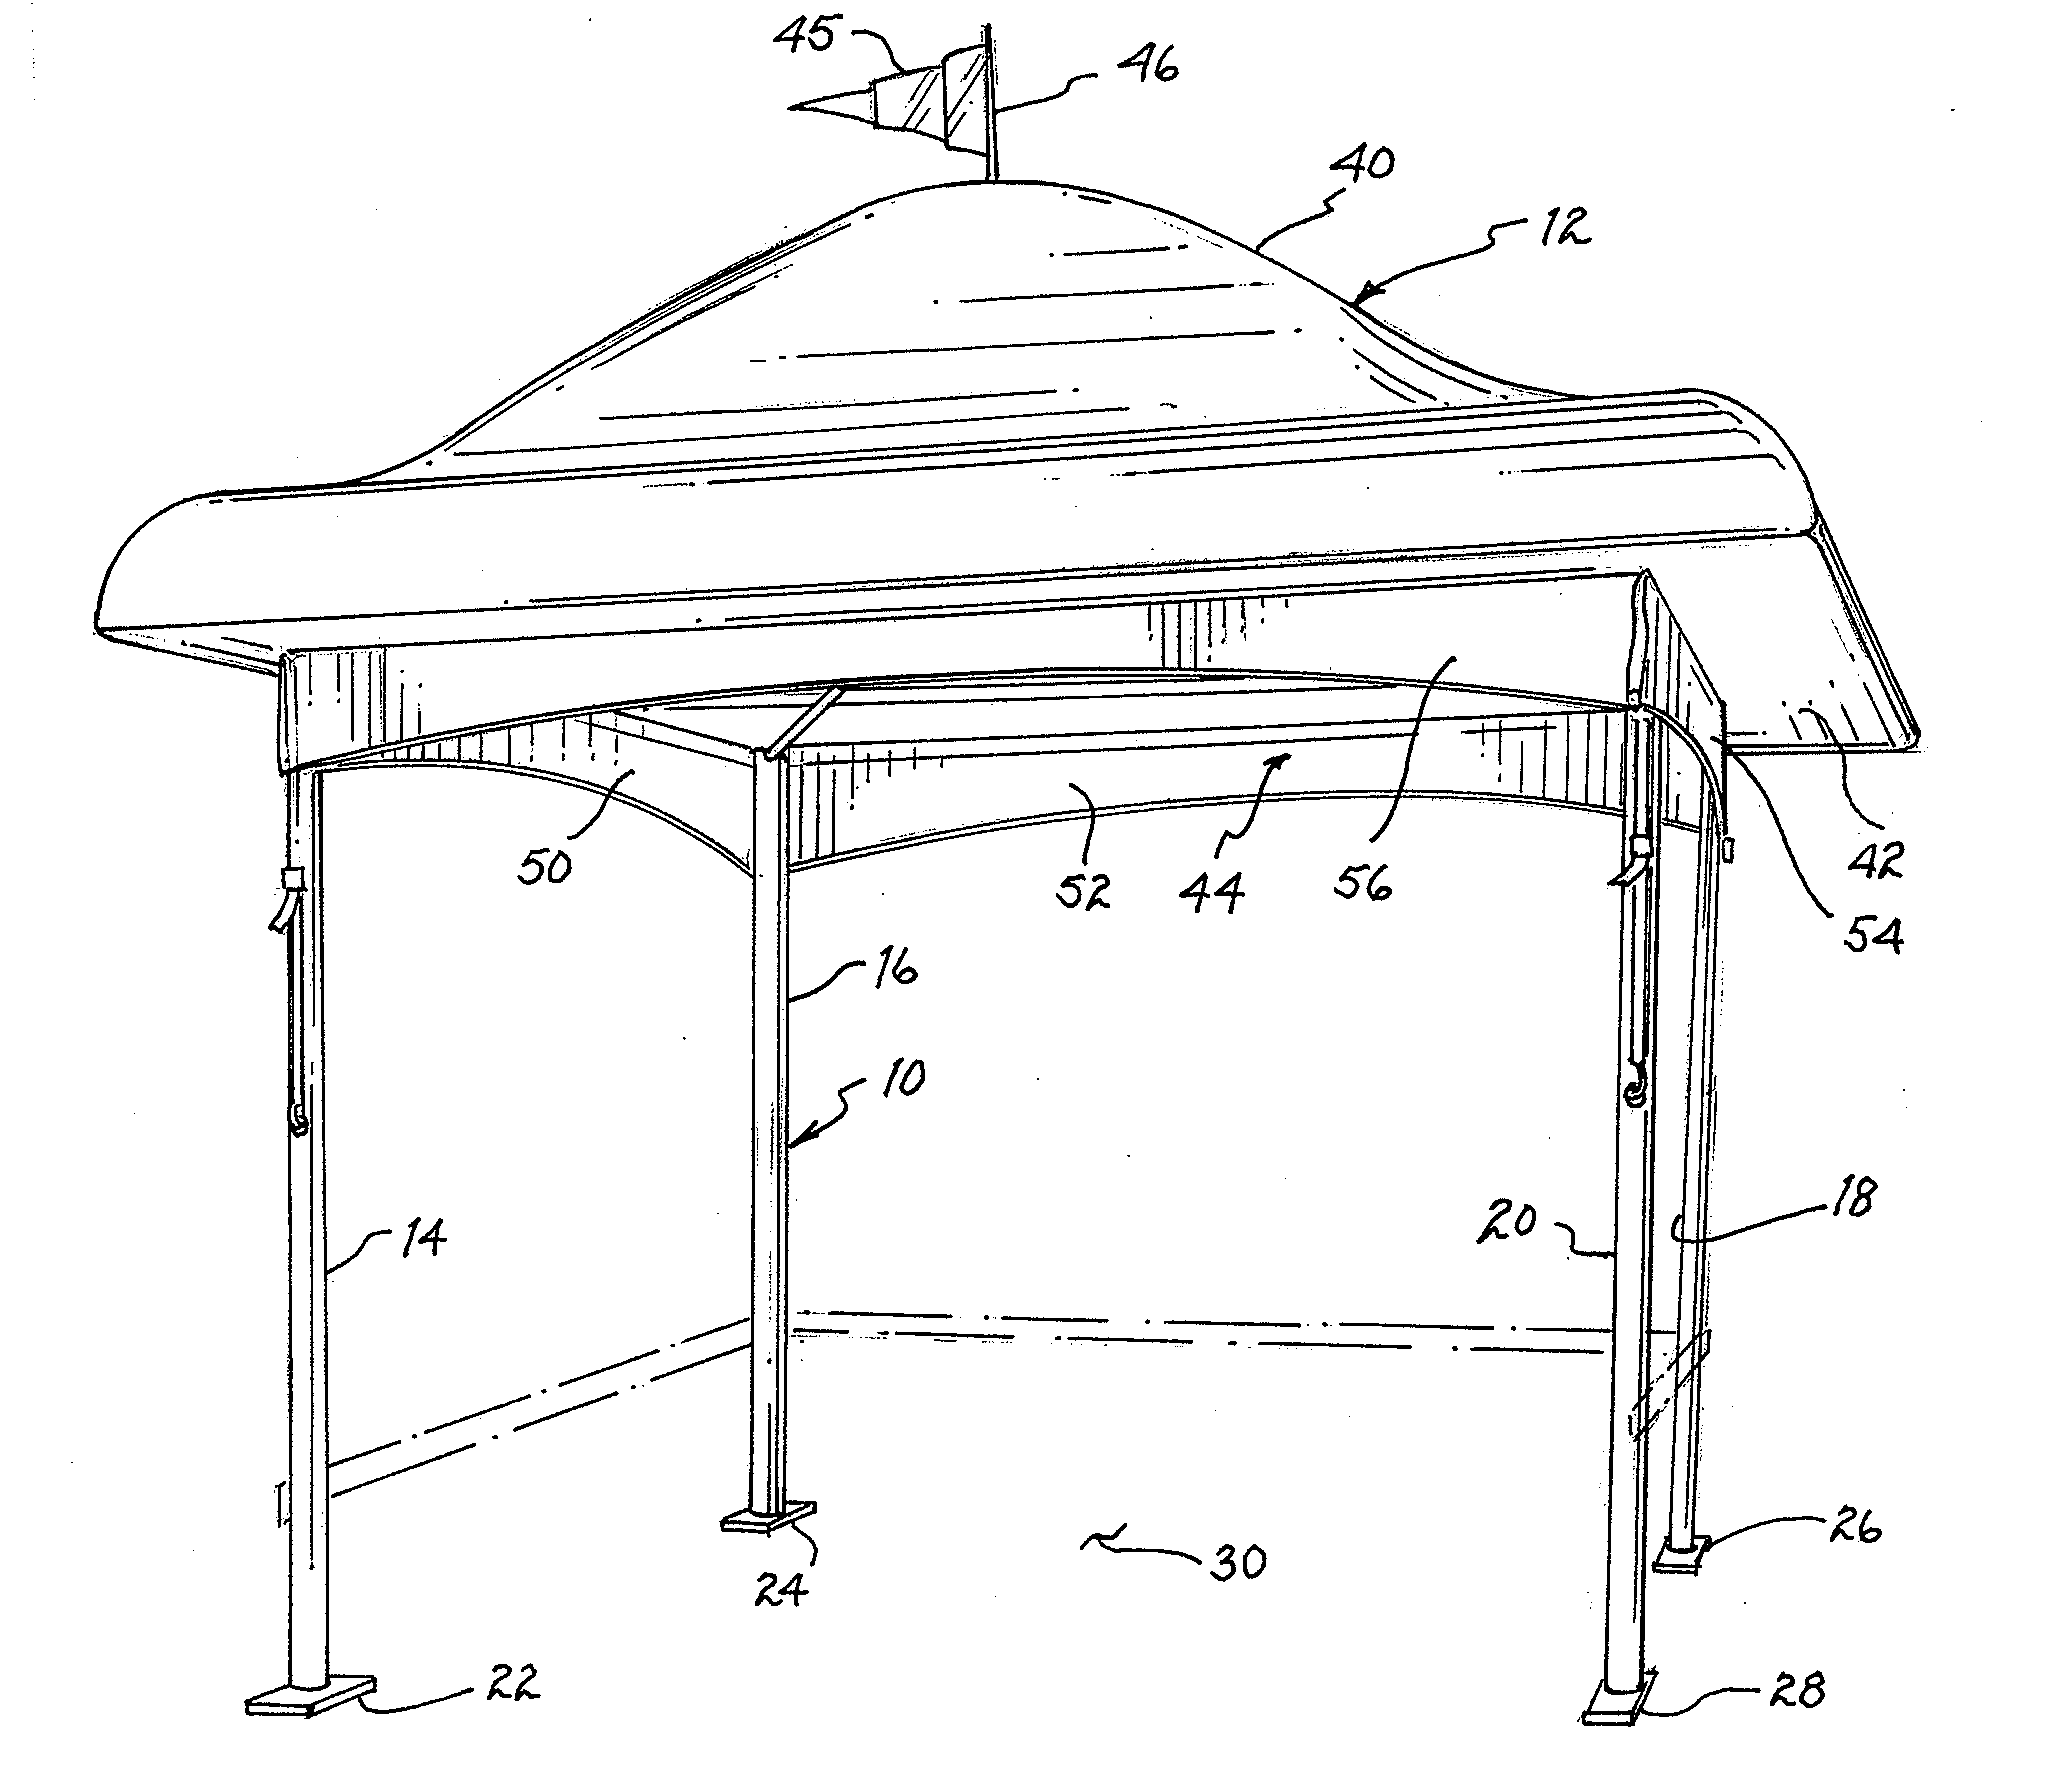 Booth with inflatable canopy